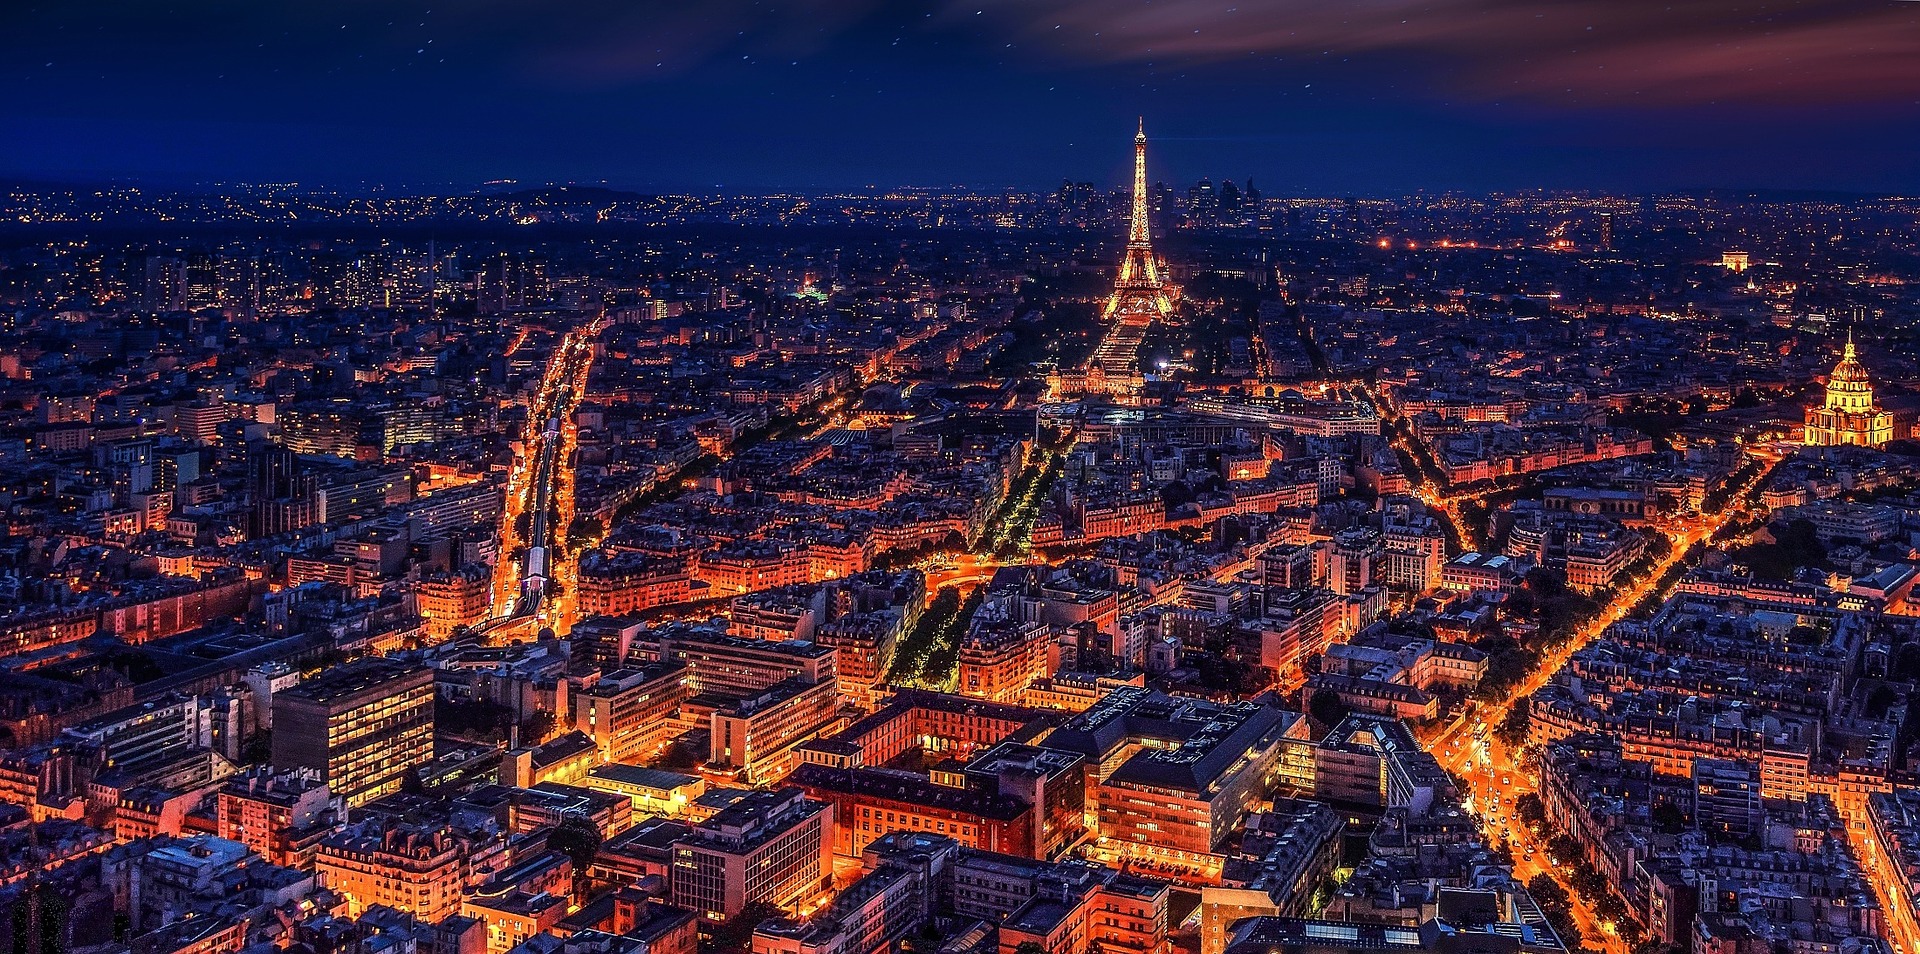 Where to find the best views of Paris from above: Top Paris viewpoints